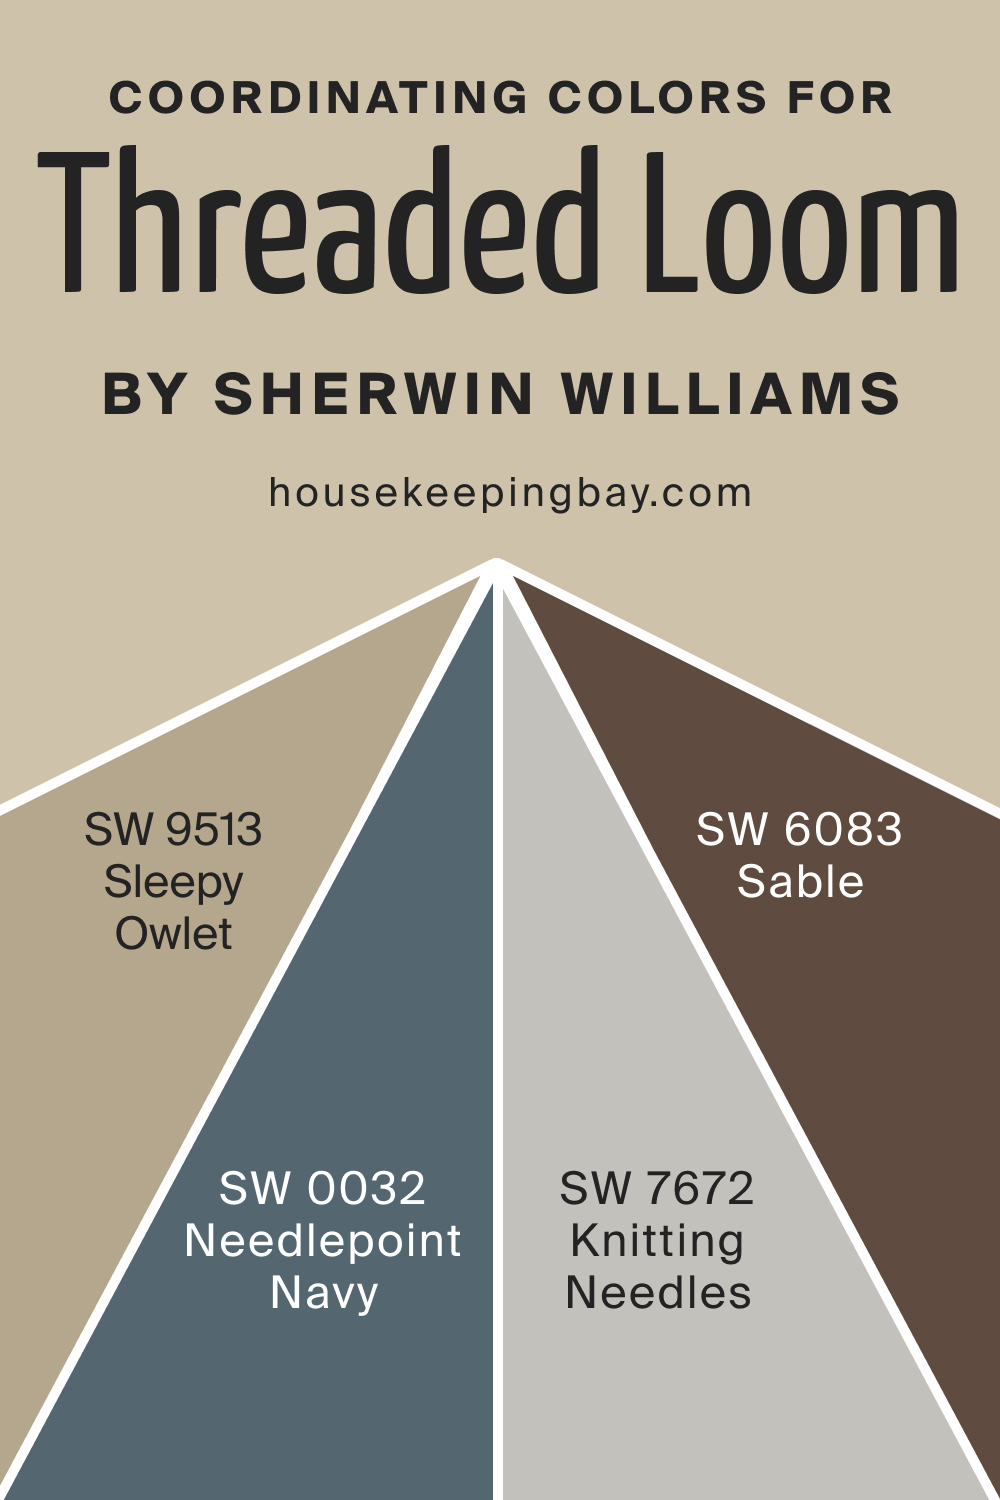 Coordinating Colors for SW 9512 Threaded Loom by Sherwin Williams